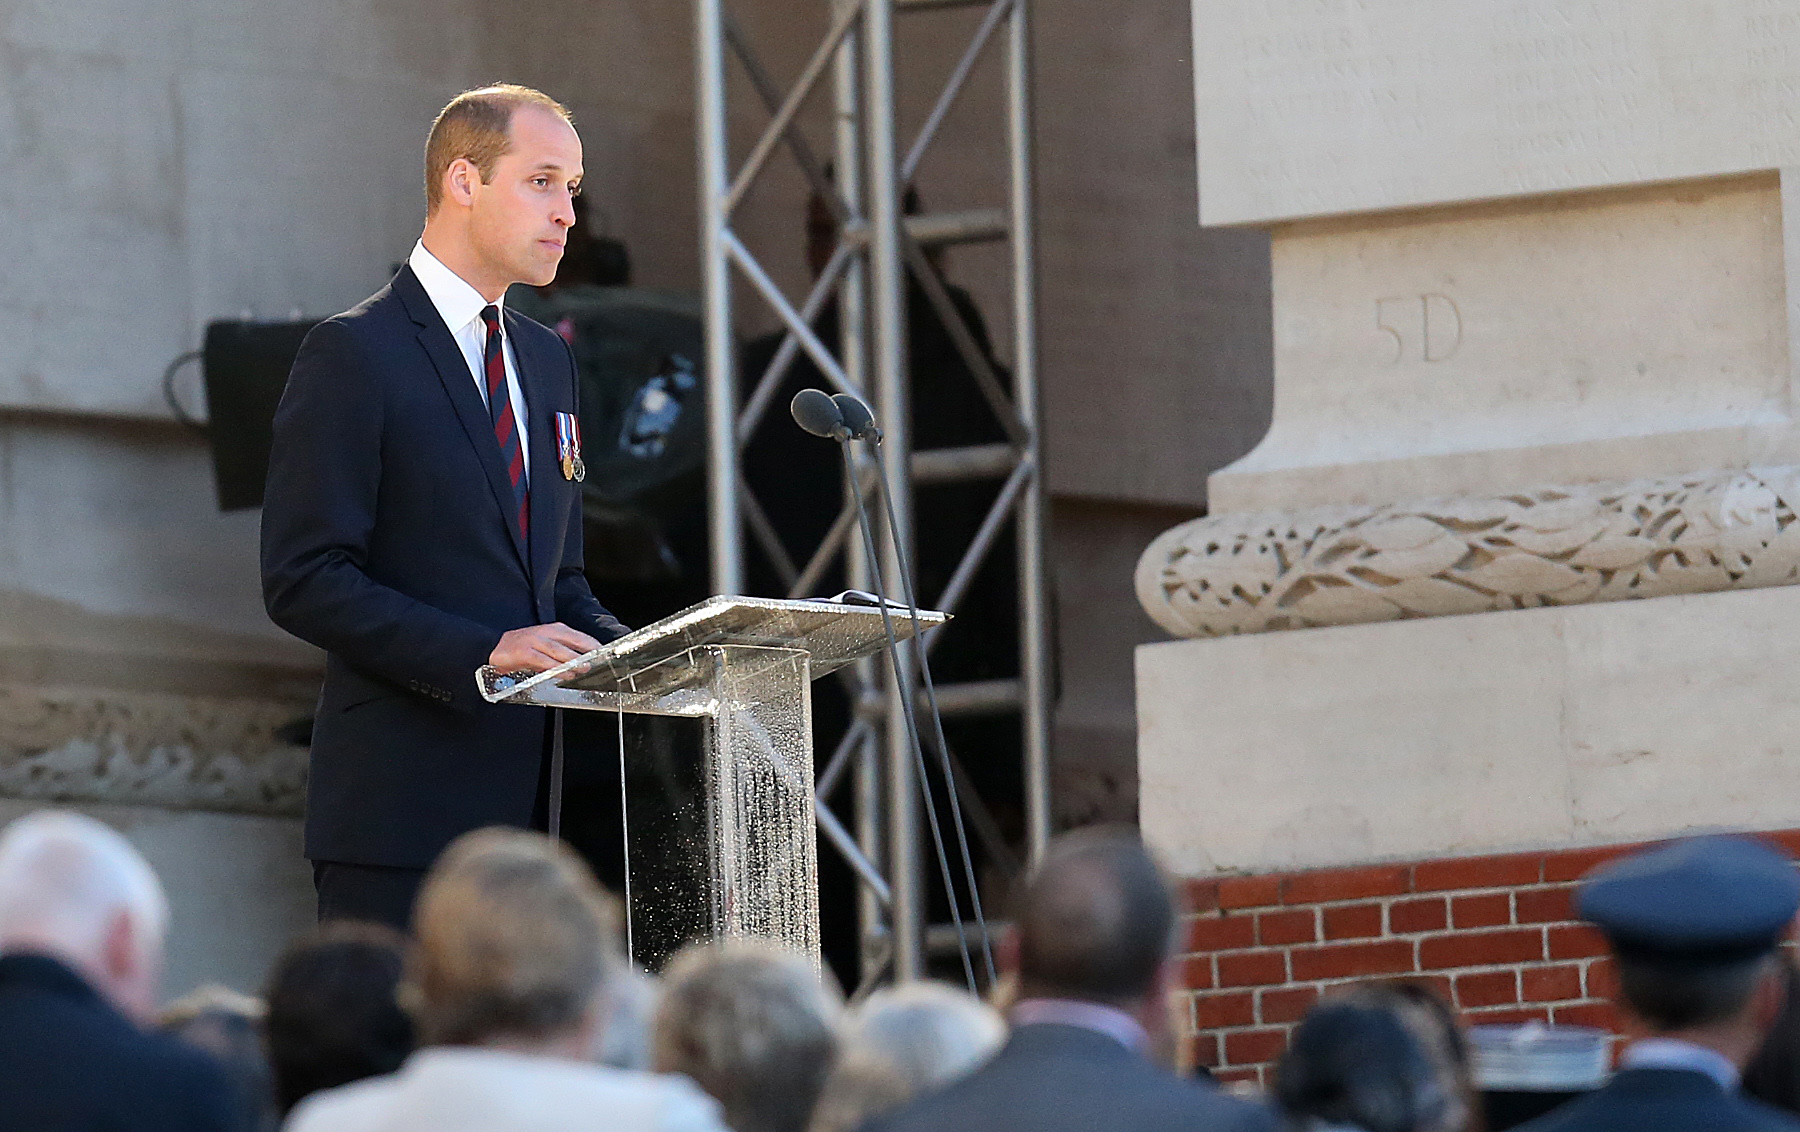 Britain's Prince William delivers a speech during the commemoration of the 100th anniversary of the Battle of the Somme, the deadliest battle in British history in which 20,000 men died on the first day of combat alone, on June 30, 2016 at the Thiepval Memorial, northern France. / AFP PHOTO / FRANCOIS NASCIMBENI